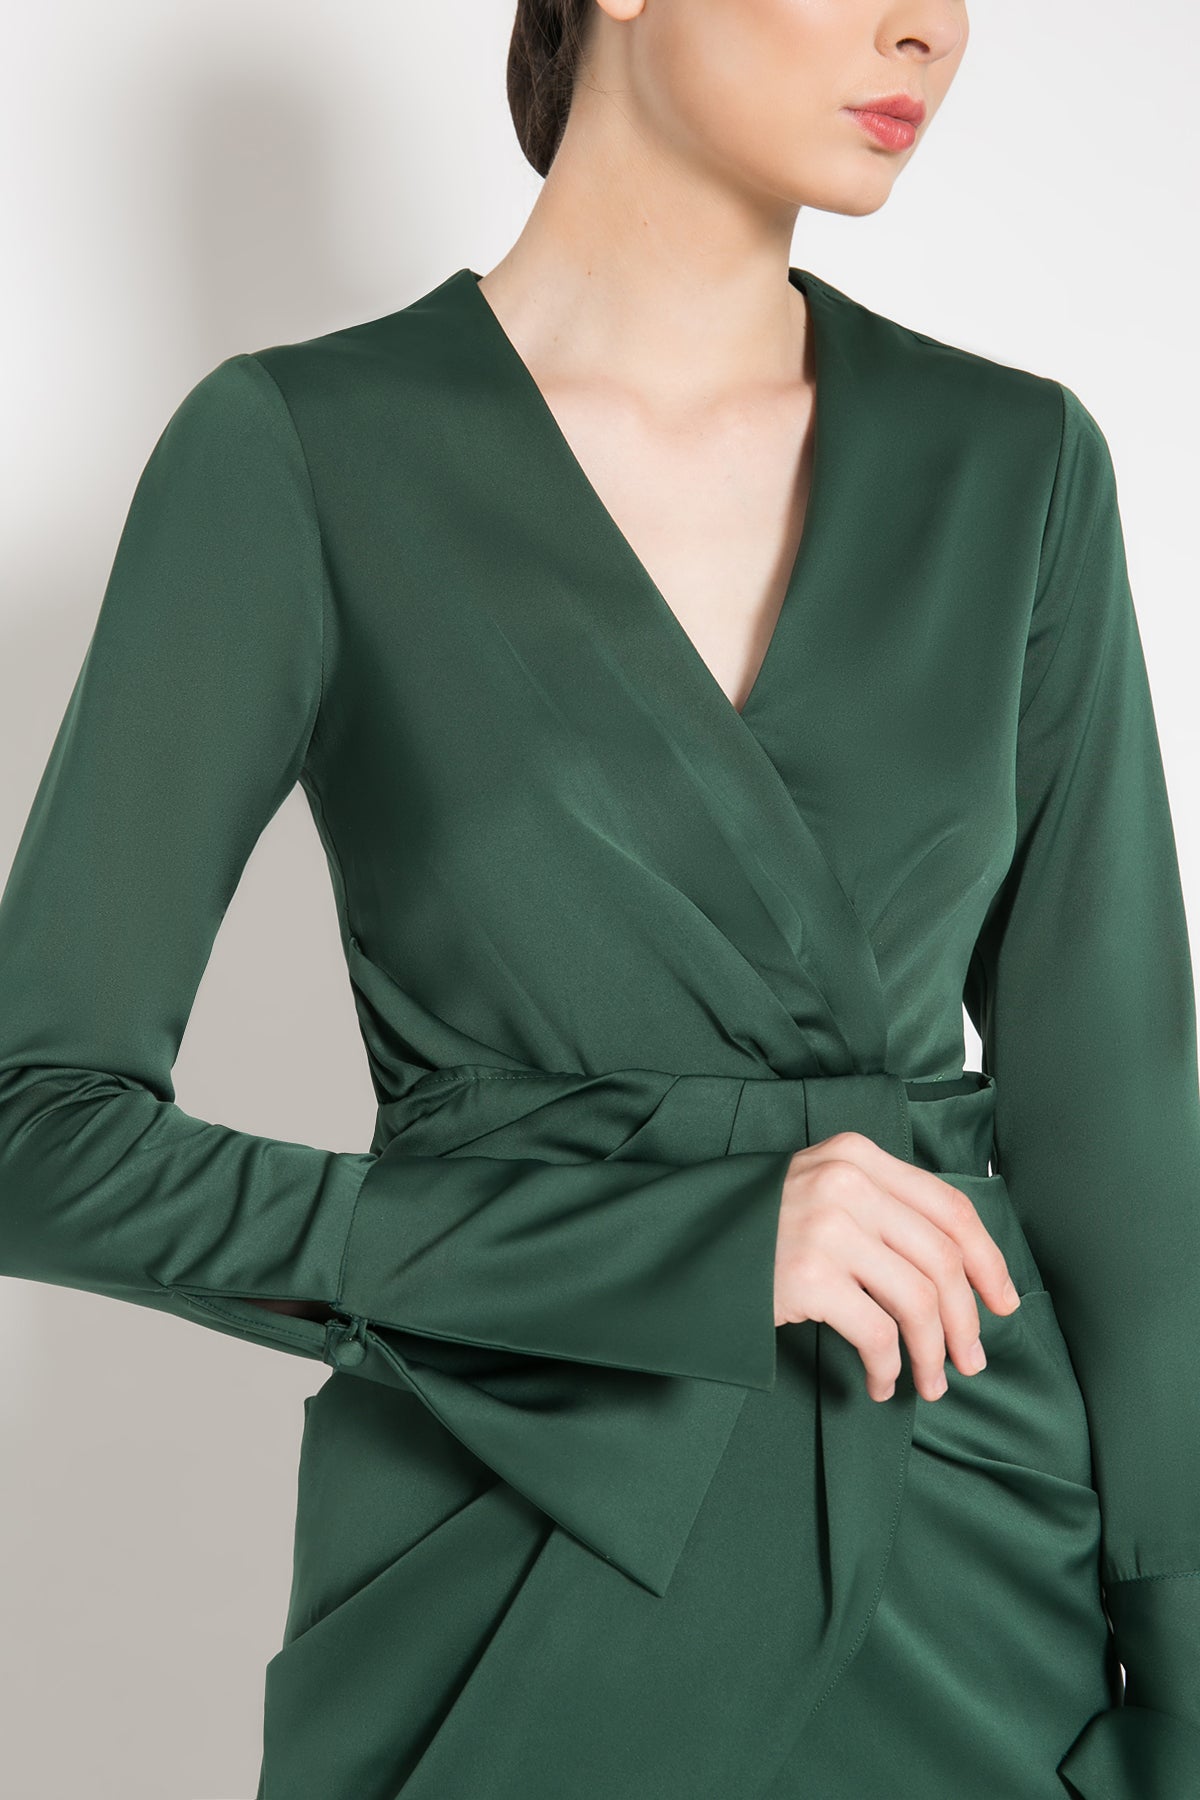 Provence Dress in Emerald Green